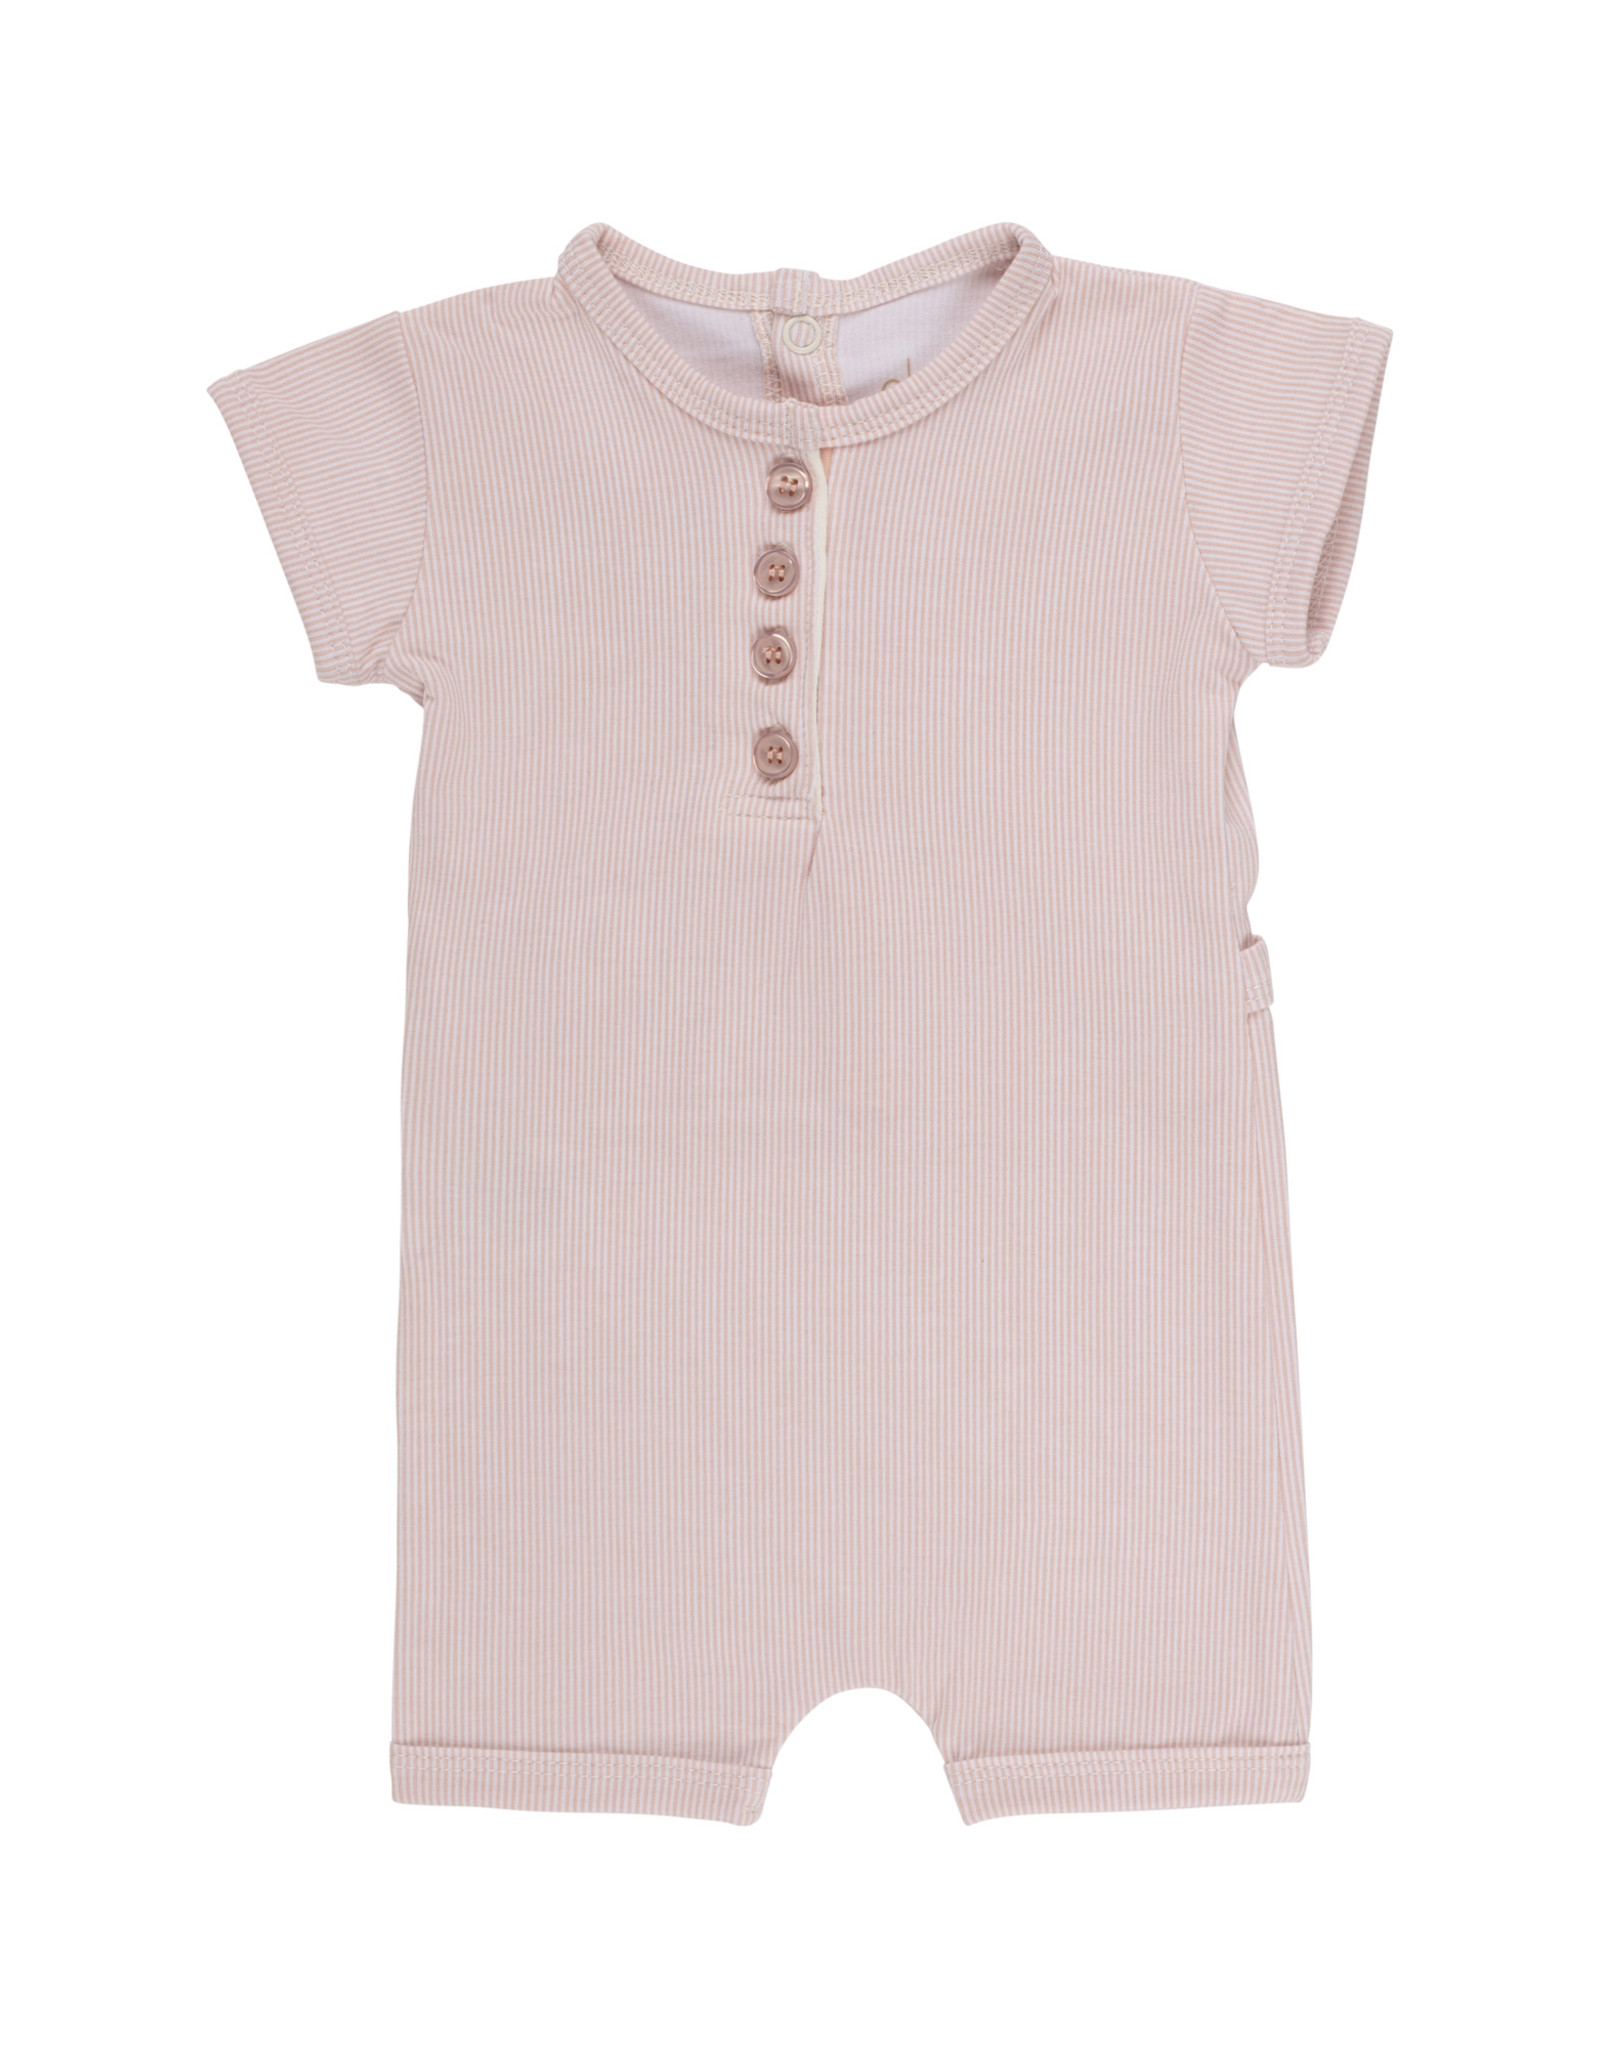 Ely's & Co ely's & co Thin Striped Henley Romper